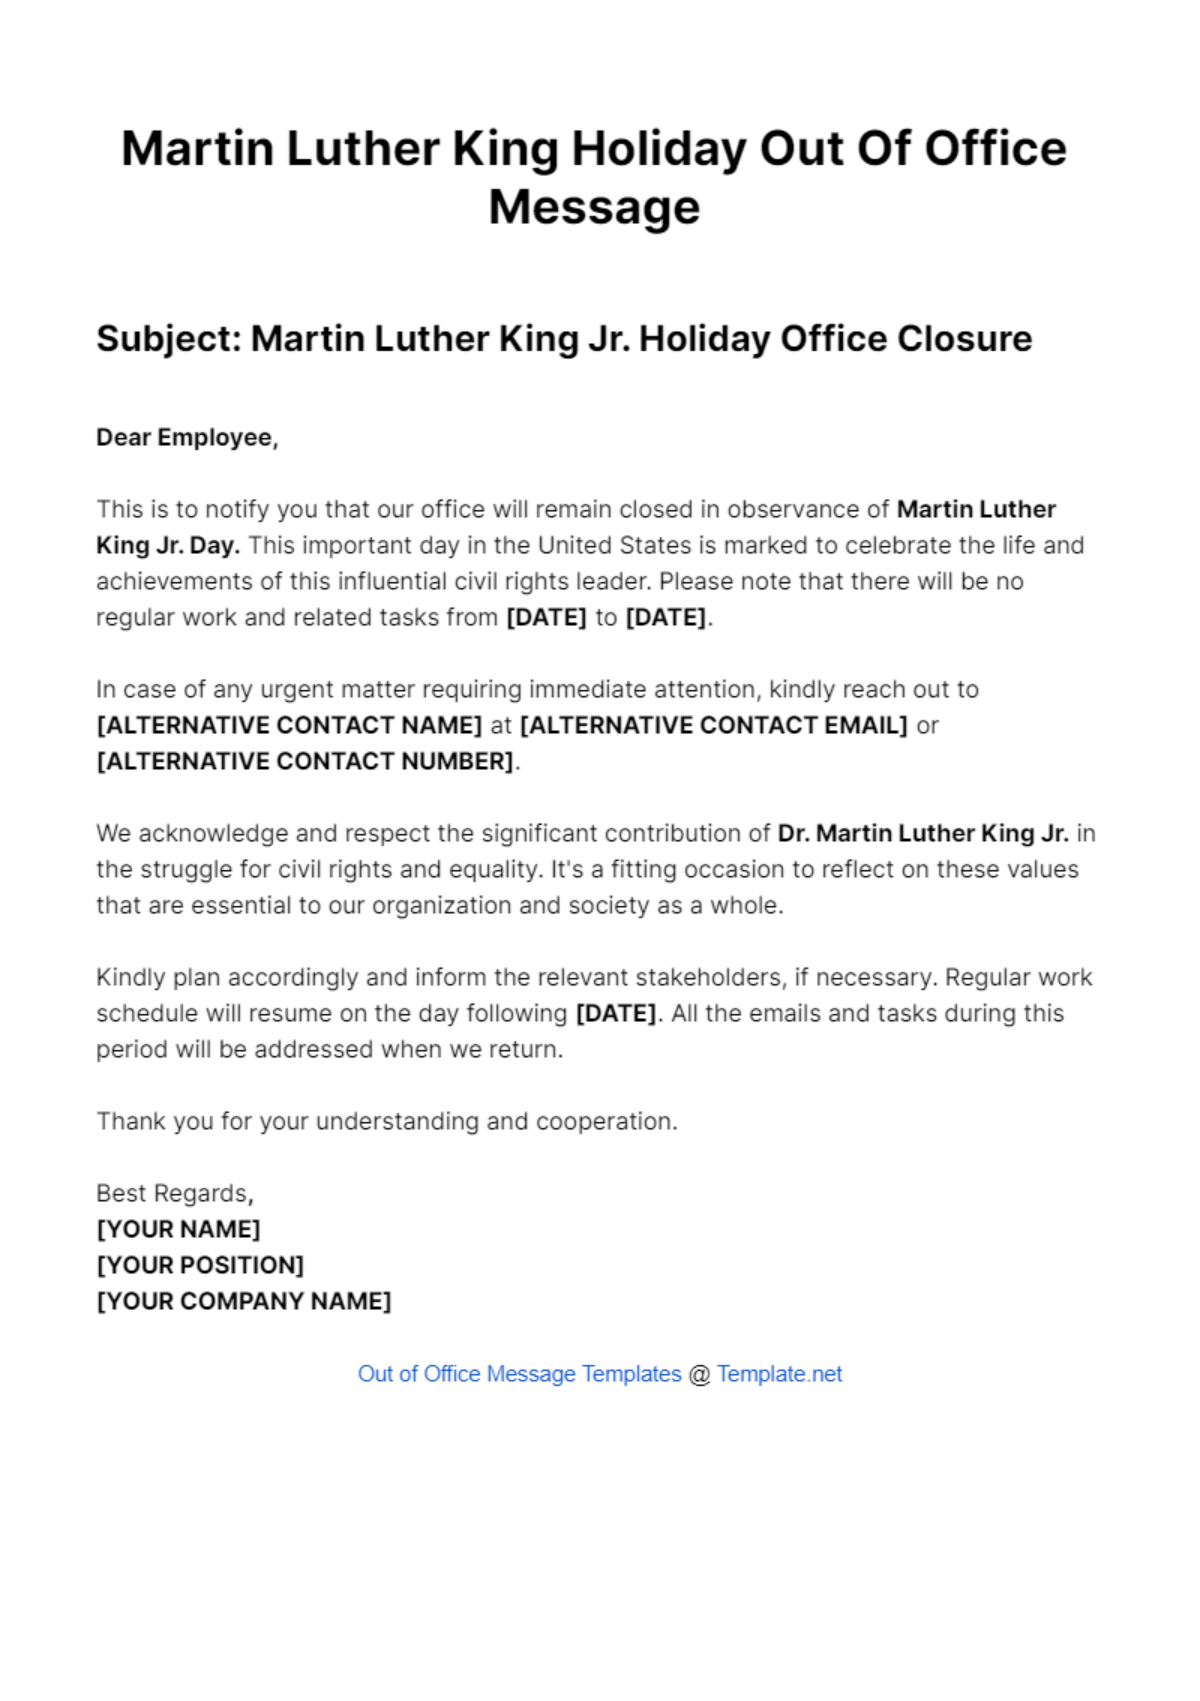 Free Martin Luther King Holiday Out Of Office Message Template